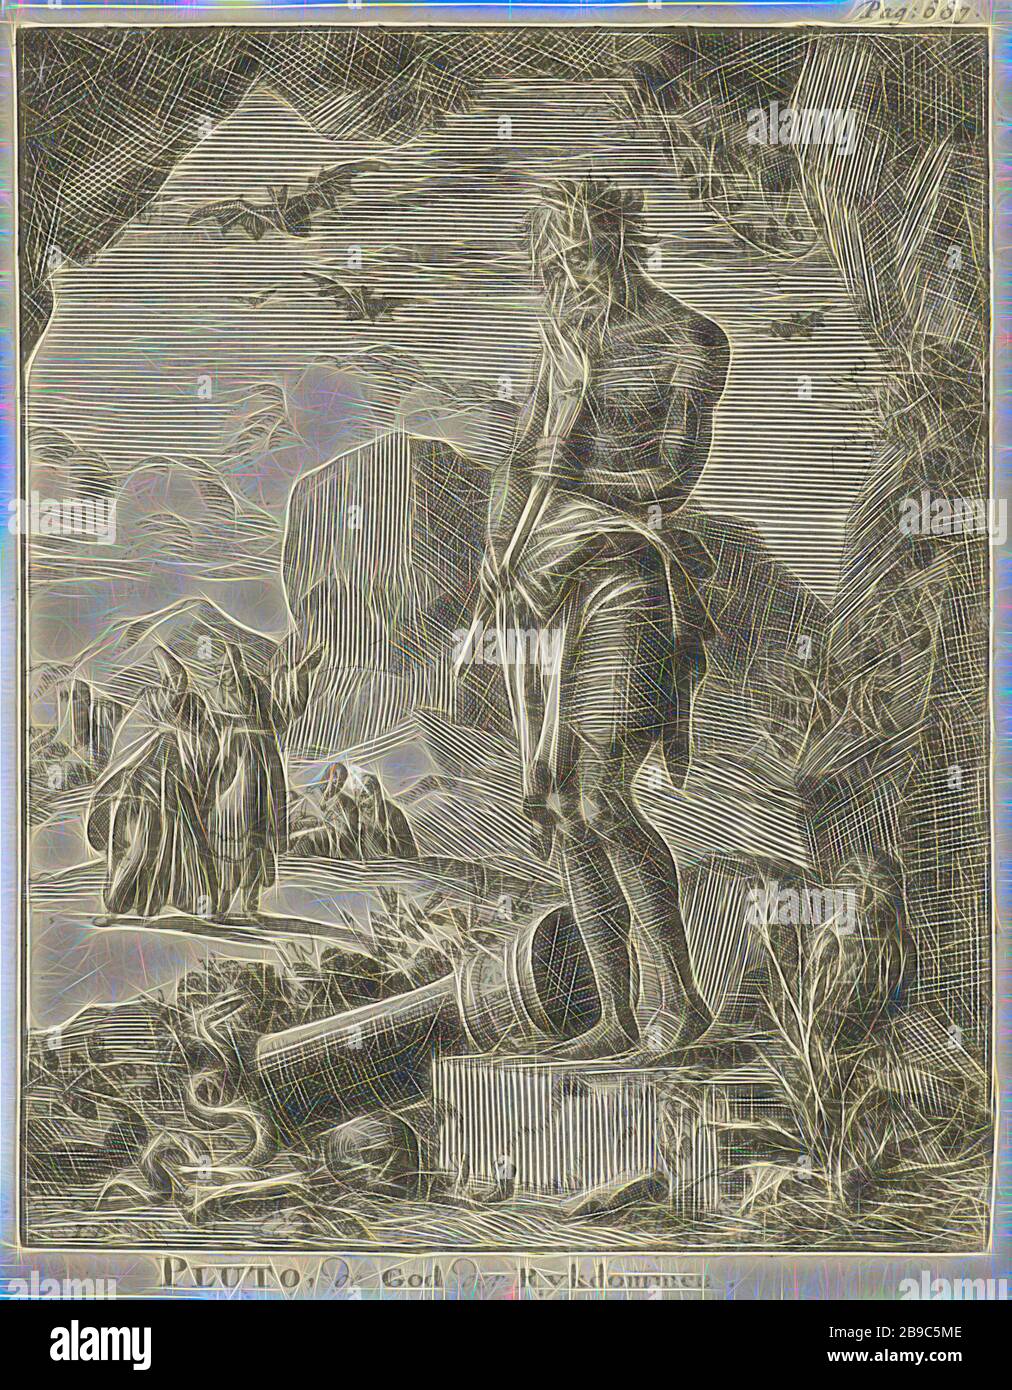 Statue of Pluto Pluto, the God of the Rykdoms (title on object), Print upper right: Pag: 687, (story of) Pluto (Hades), Dis Pater, Orcus, statues, paintings, etc., objects of worship in Roman religion, Jan Luyken (mentioned on object), Amsterdam, 1686, paper, etching, h 166 mm × w 130 mm, Reimagined by Gibon, design of warm cheerful glowing of brightness and light rays radiance. Classic art reinvented with a modern twist. Photography inspired by futurism, embracing dynamic energy of modern technology, movement, speed and revolutionize culture. Stock Photo